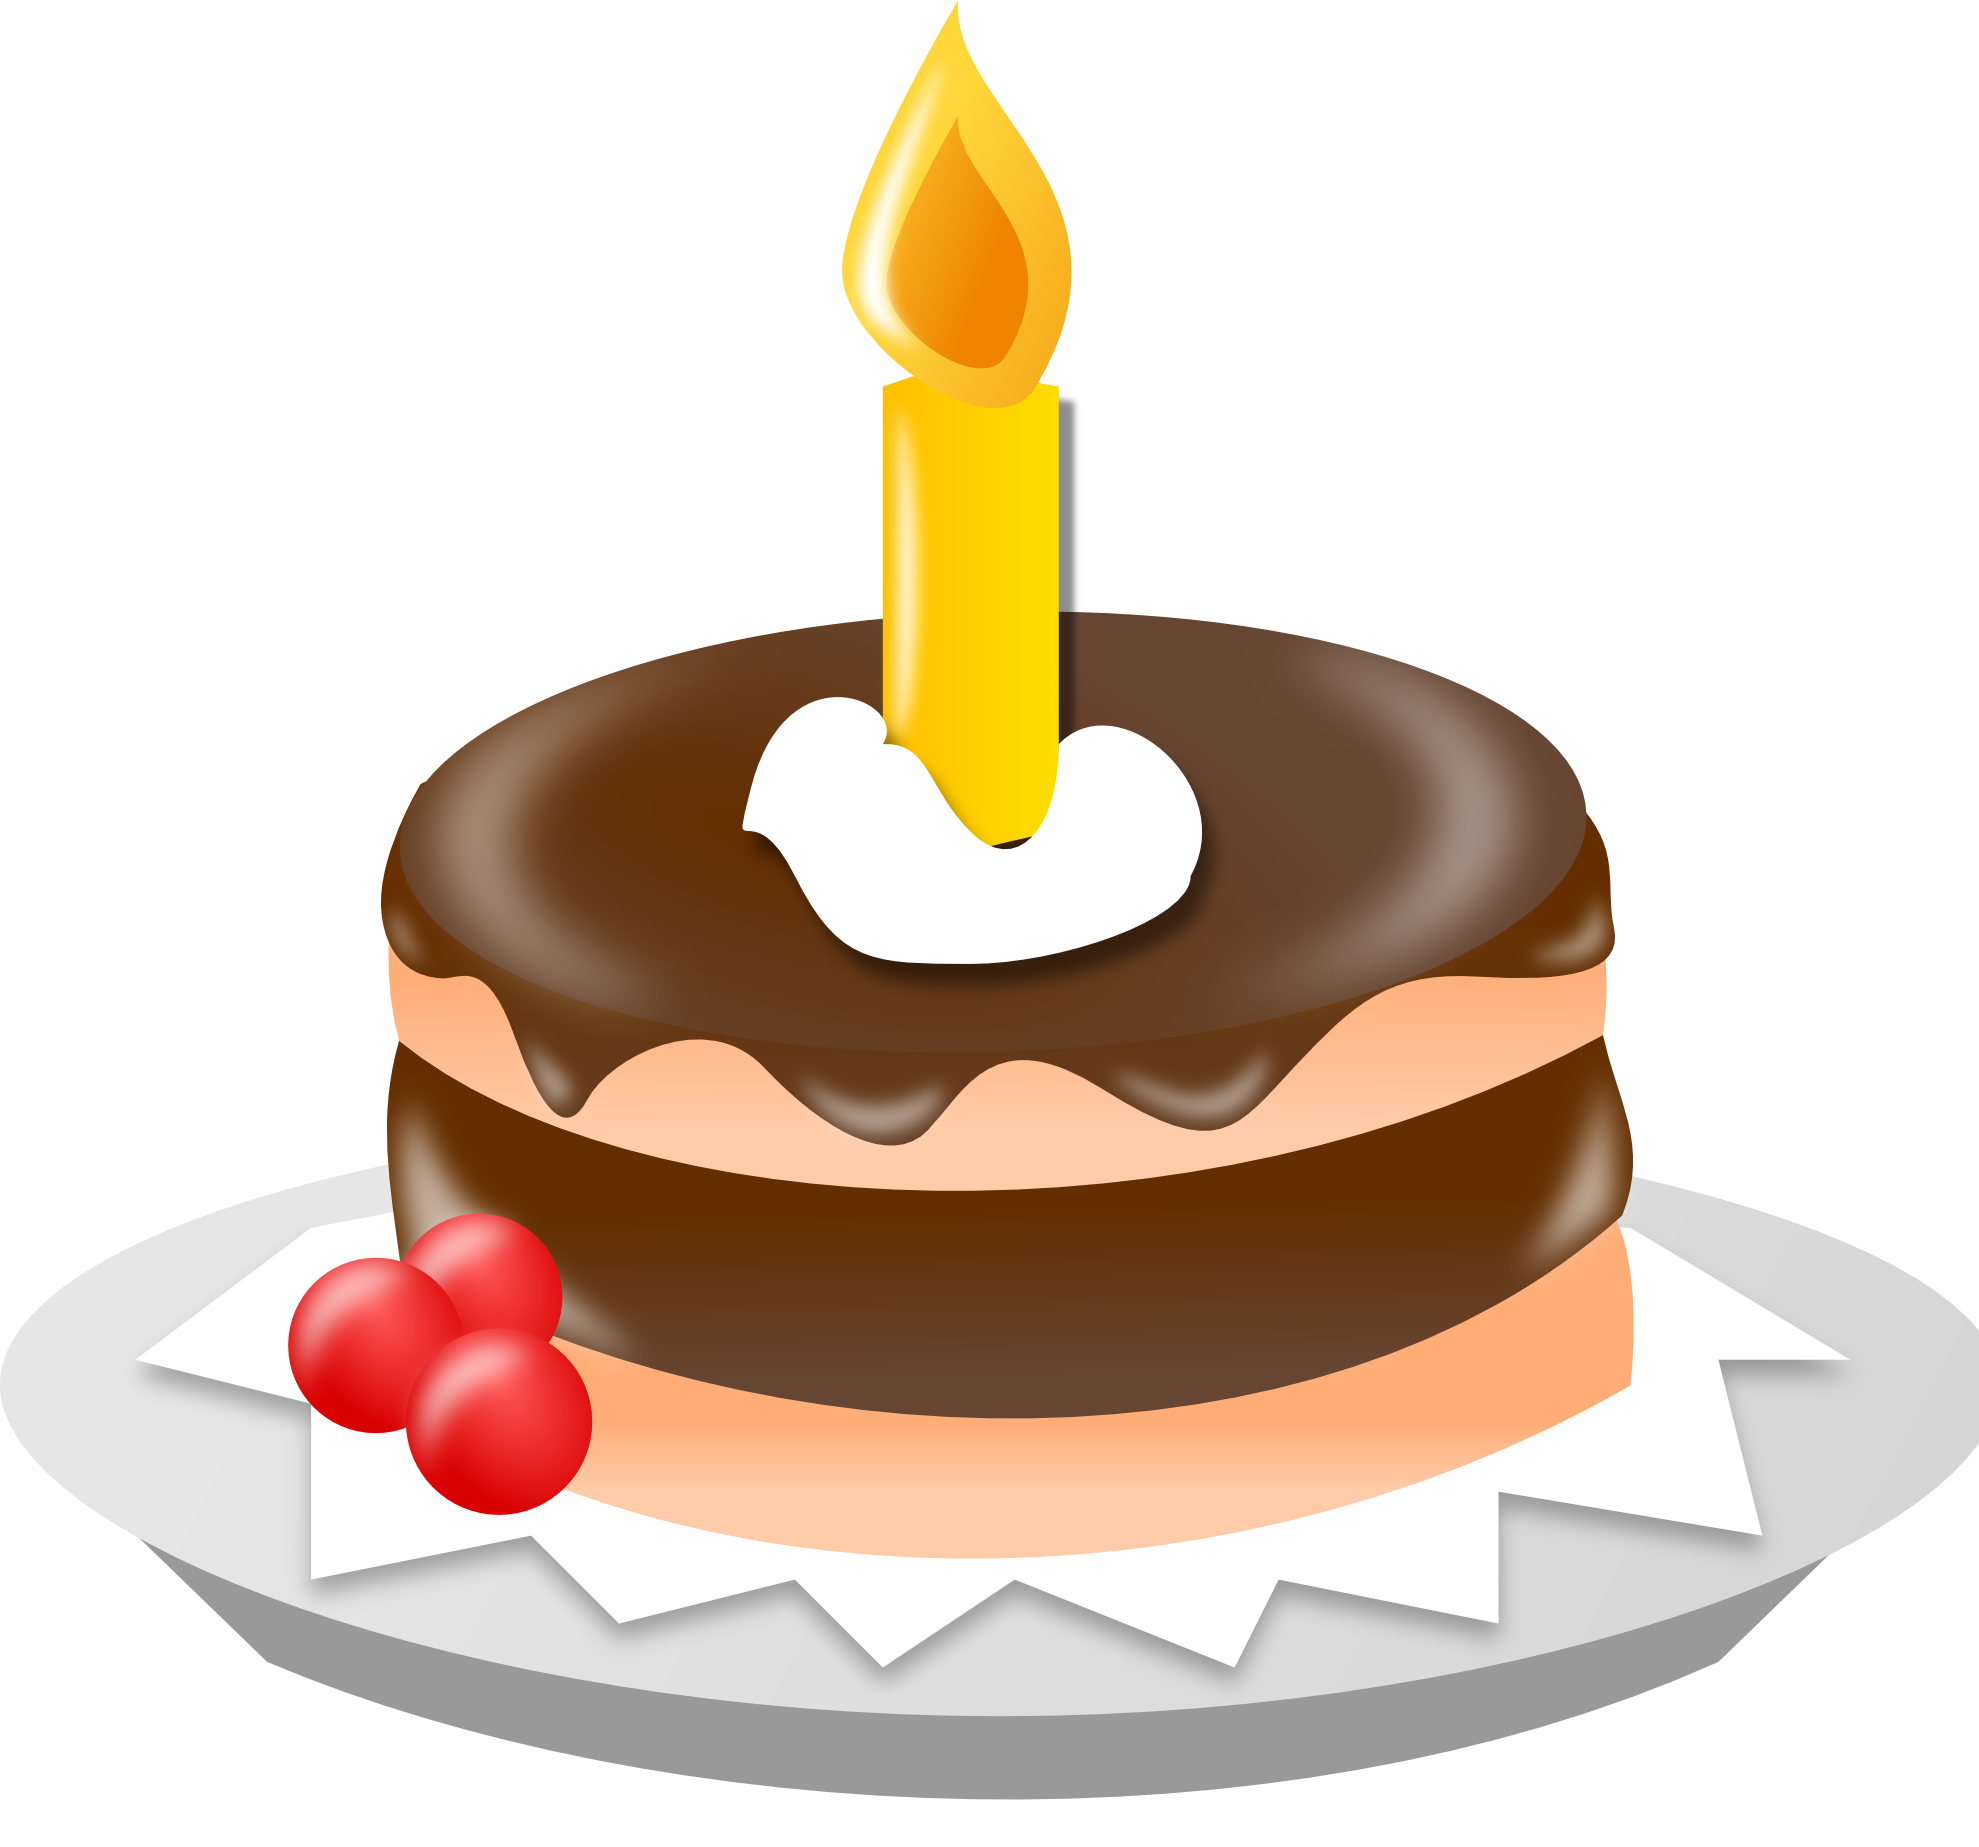 Birthday Cake Illustration PNG Transparent, Vector Illustration Birthday  Cake, Birthday Cake, Happy Birthday, Cake PNG Image For Free Download | Birthday  cake illustration, Birthday clipart, Vector illustration